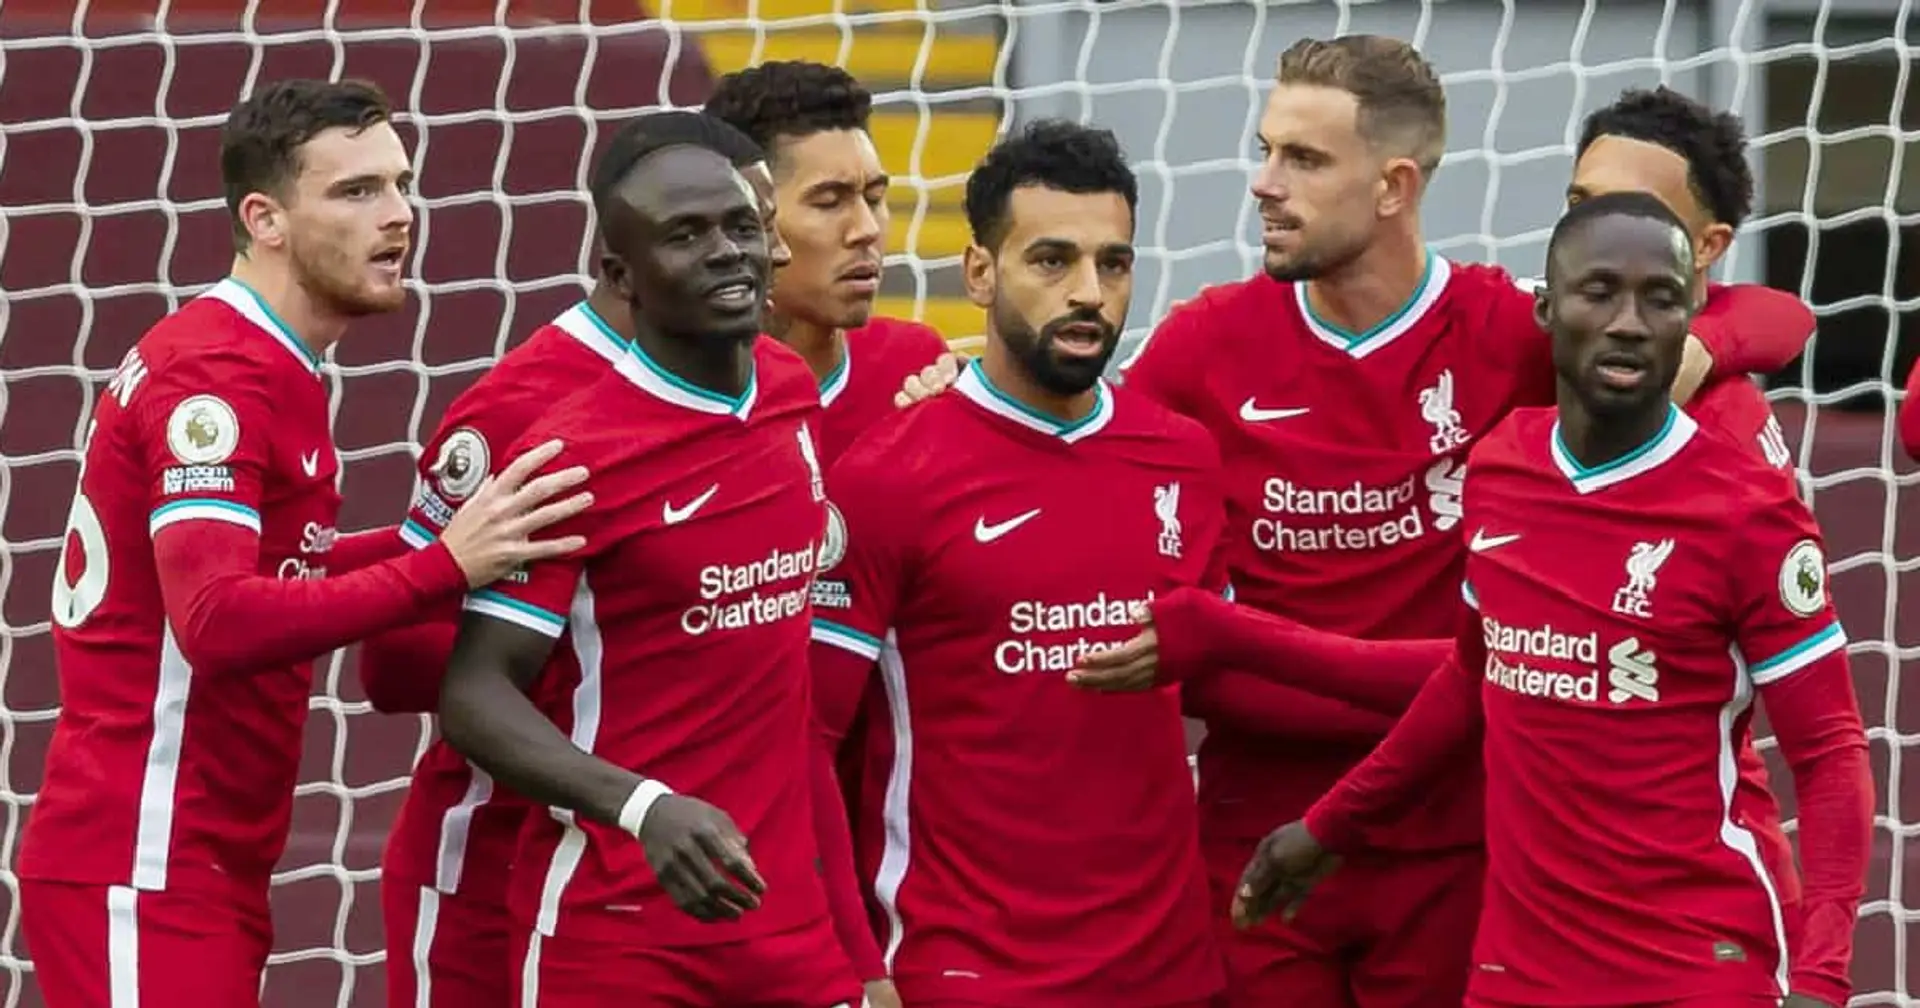 Fulham vs Liverpool: Team news, predicted line-up, score predictions and more - preview